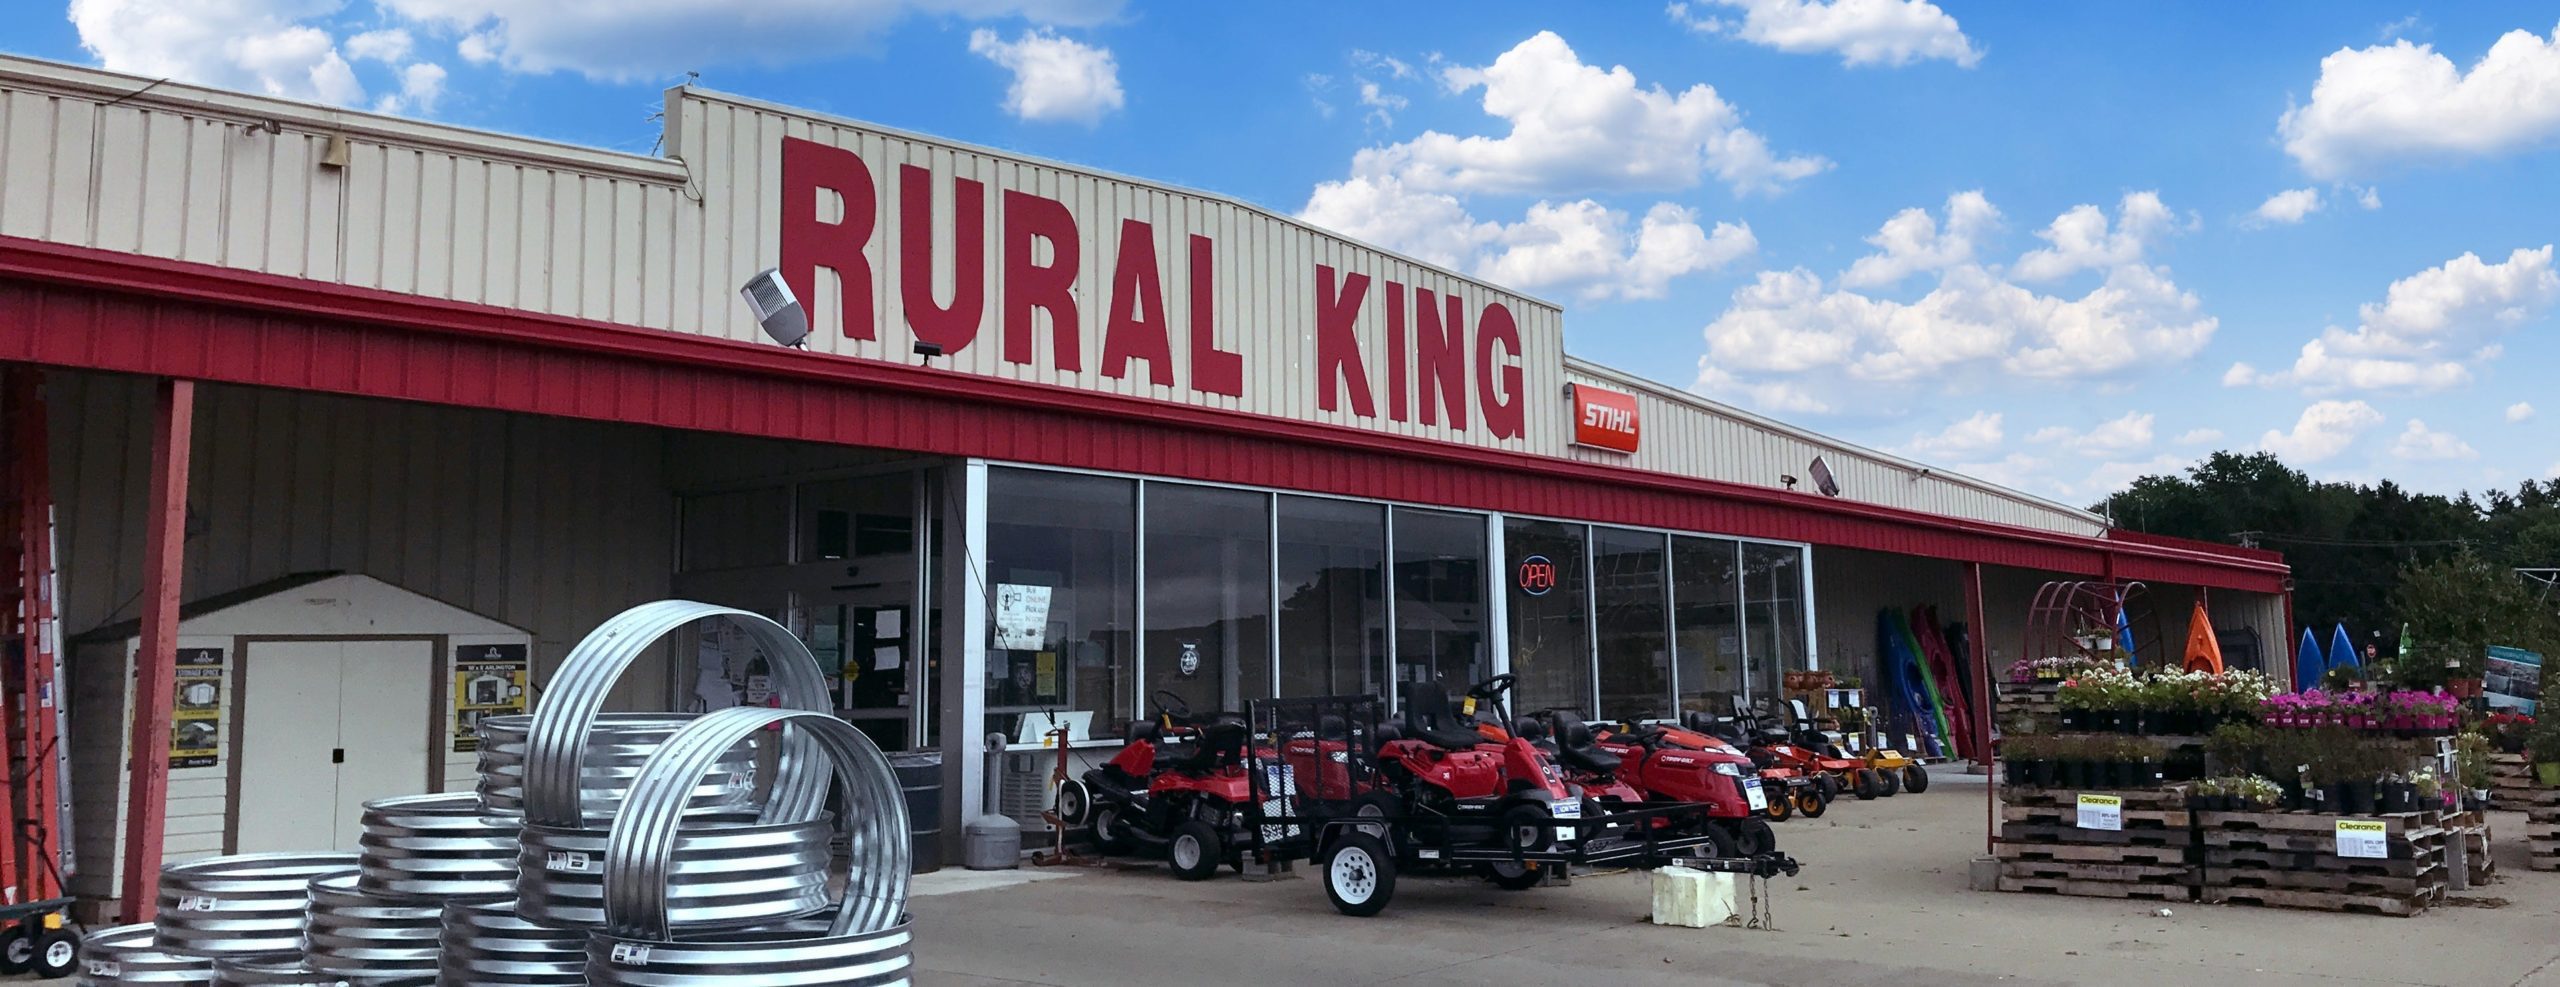 Rural King Cites Exceptional Business Climate for Expansion in Pike